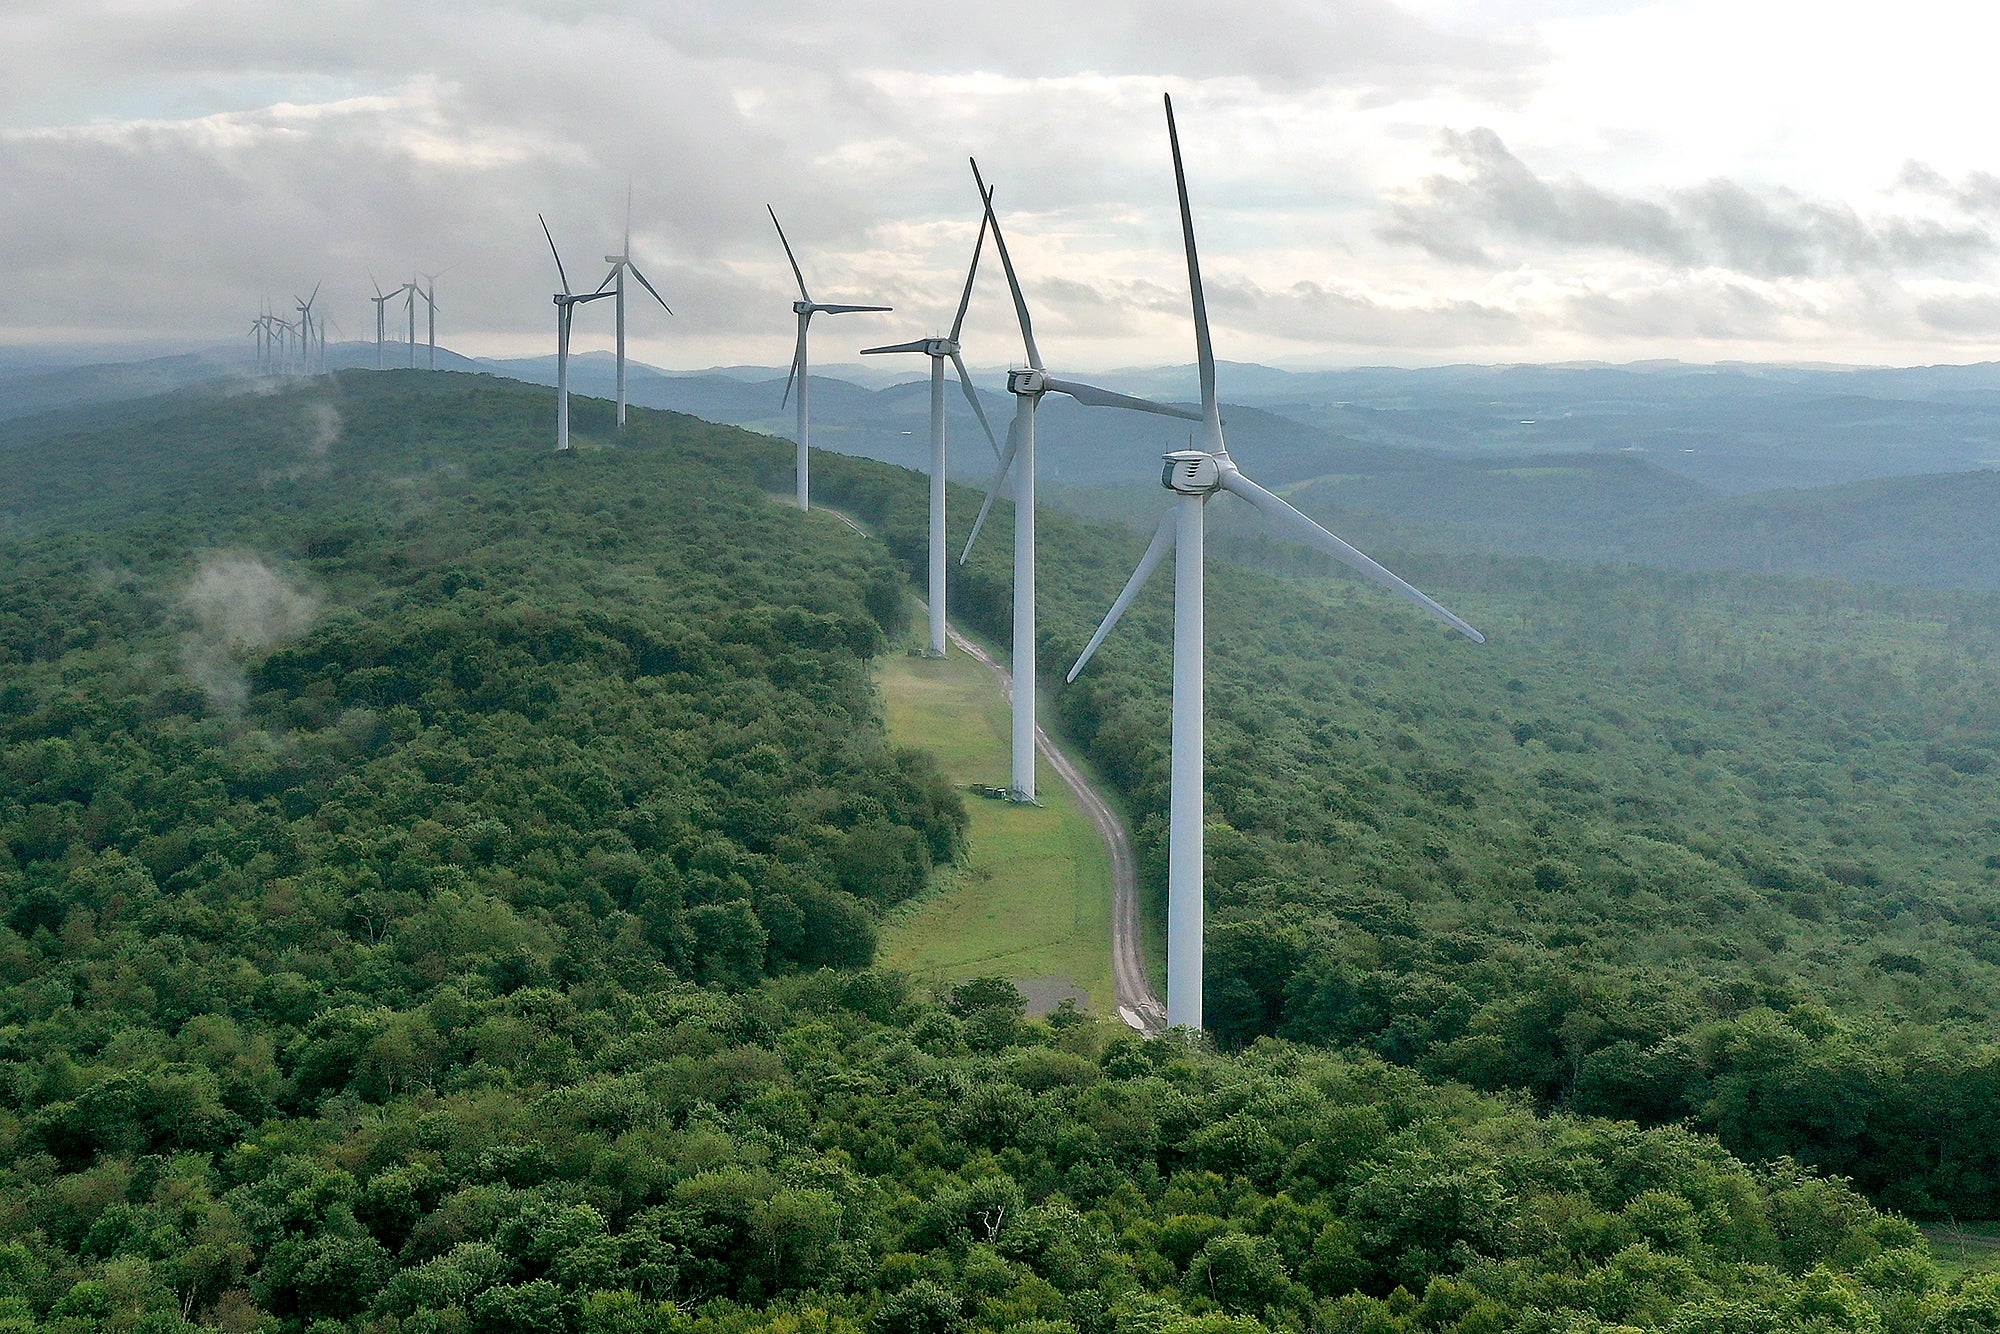 A long line of wind turbines on a tree covered mountain ridge. In this aerial view, turbines stand in a row along the top of Backbone Mountain on August 22, 2022 in Oakland, Maryland. The 70-megawatt wind farm runs along eight miles of the mountain ridge and consists of 28 Clipper 2.5 MW Liberty Turbines, each one 415-feet tall.